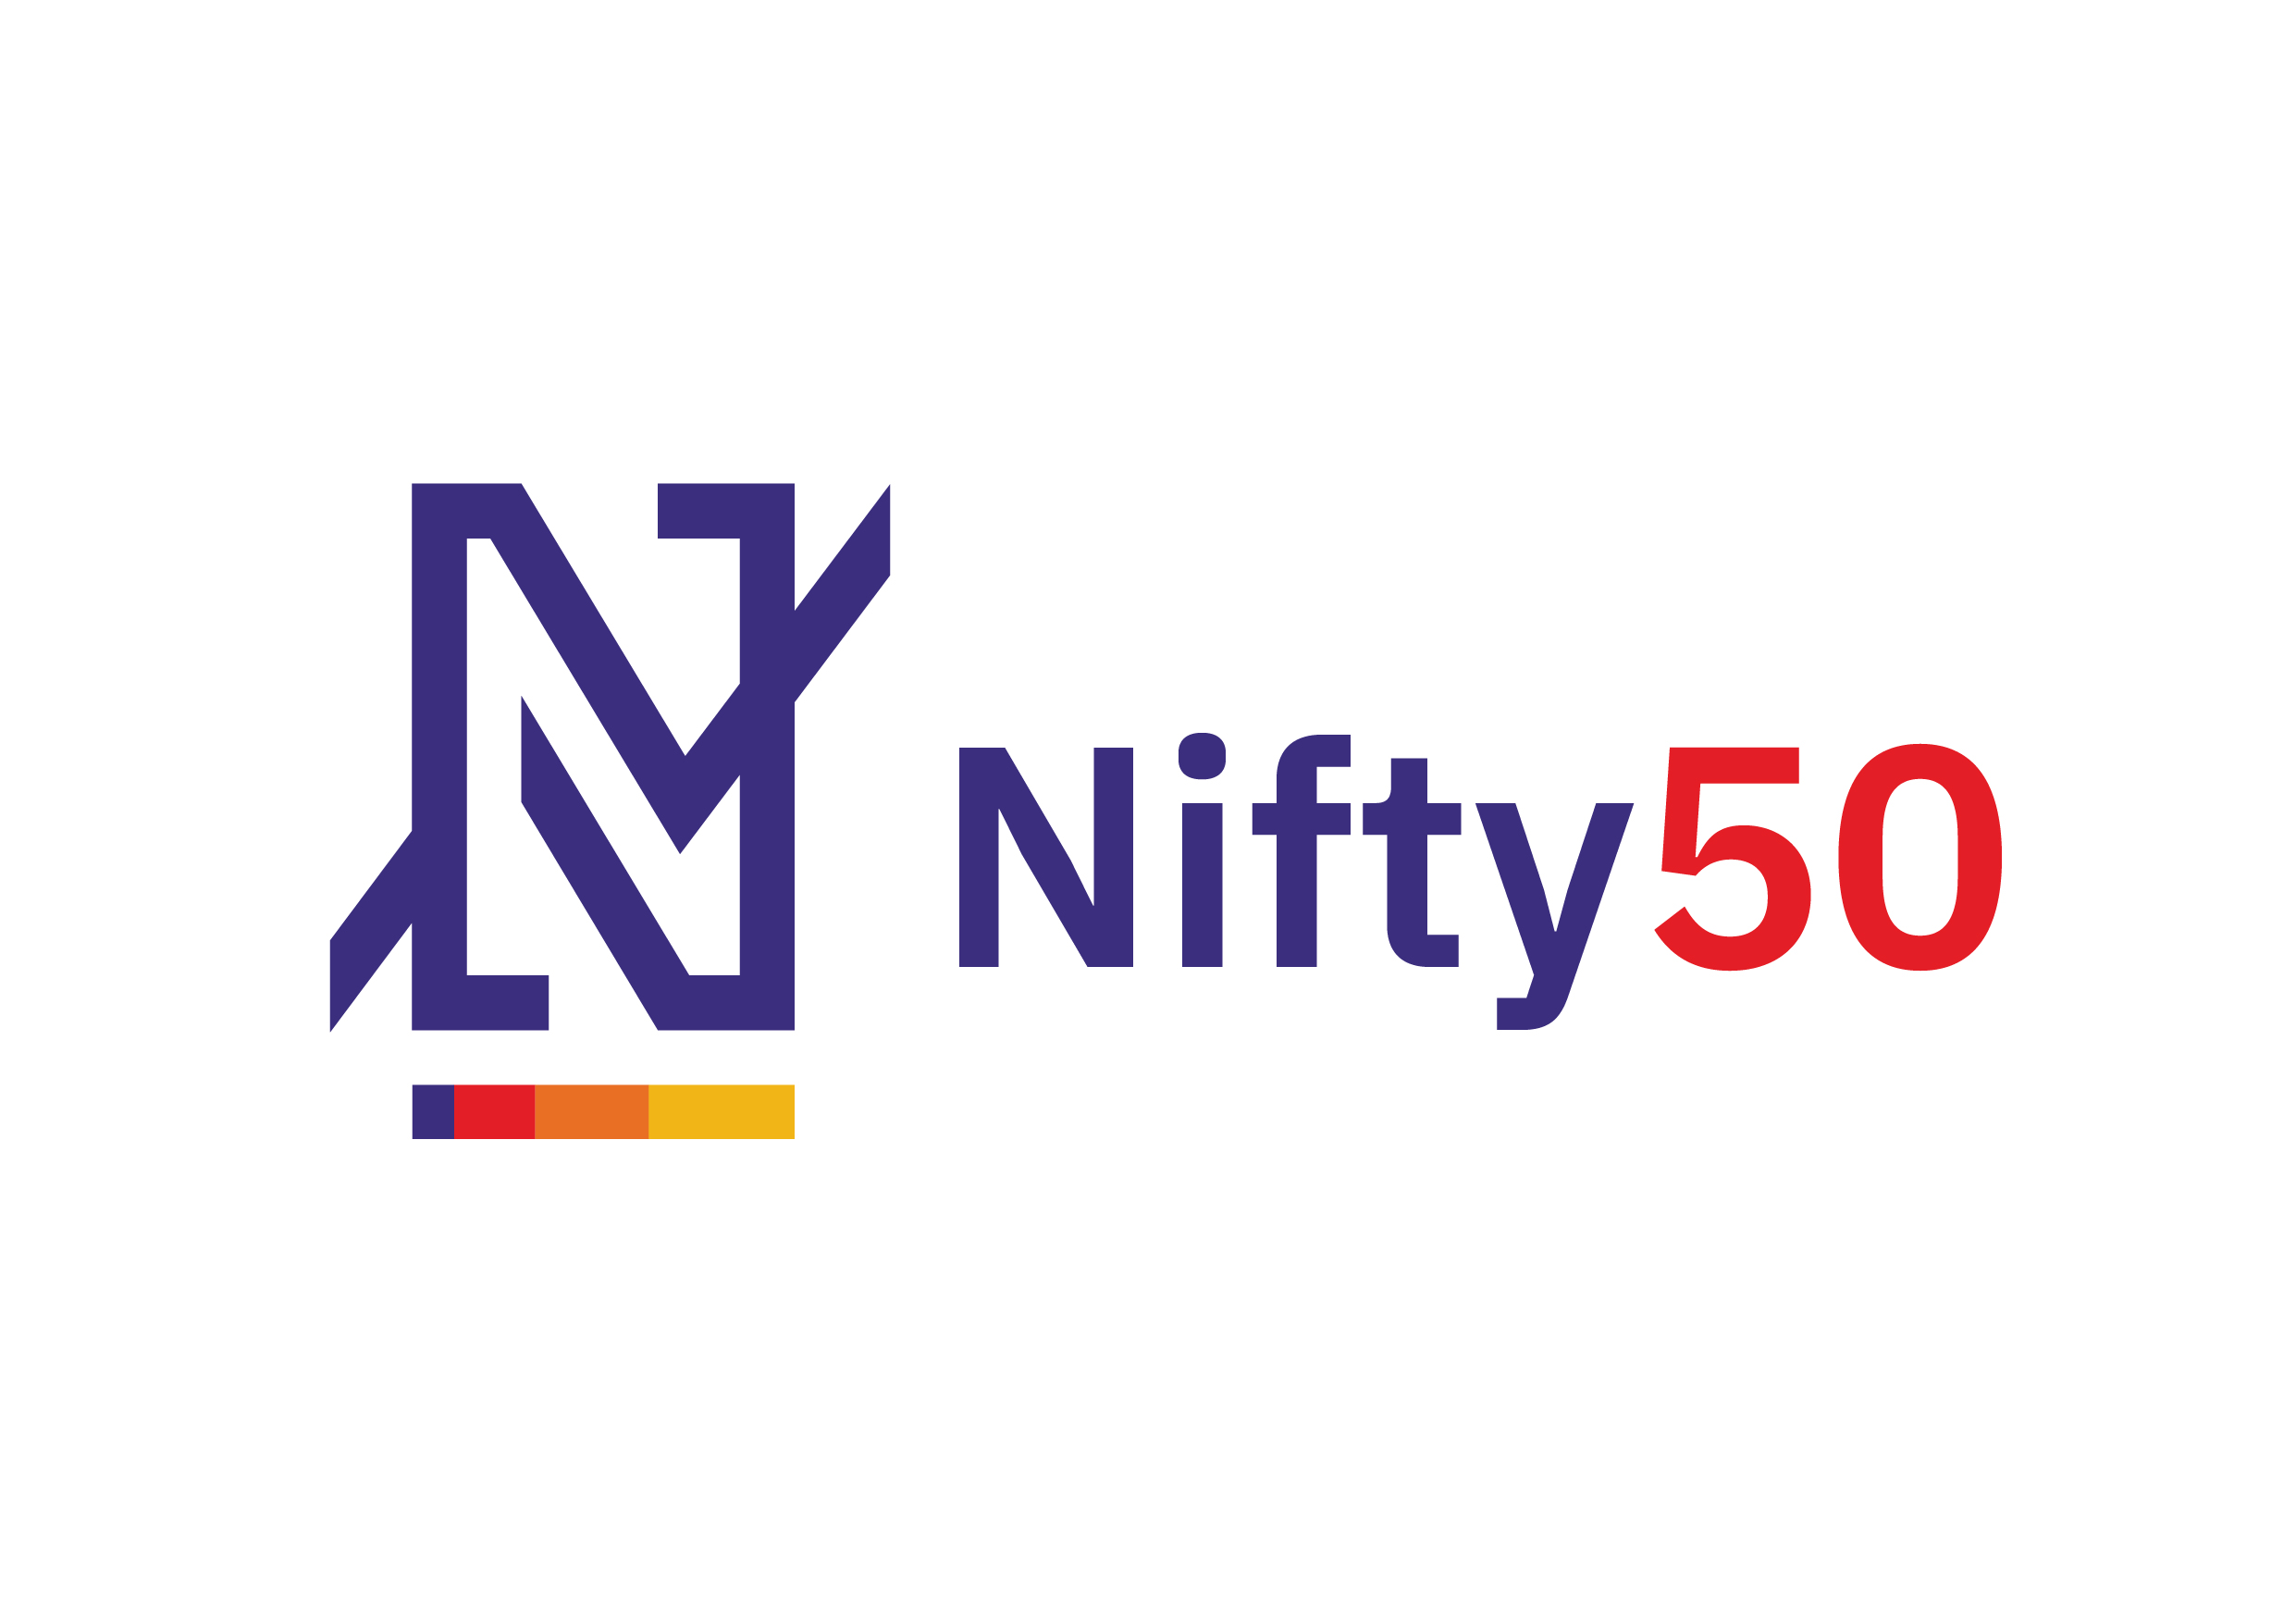 Nifty50: NSE unveils new brand identity for Nifty50 - The Economic Times